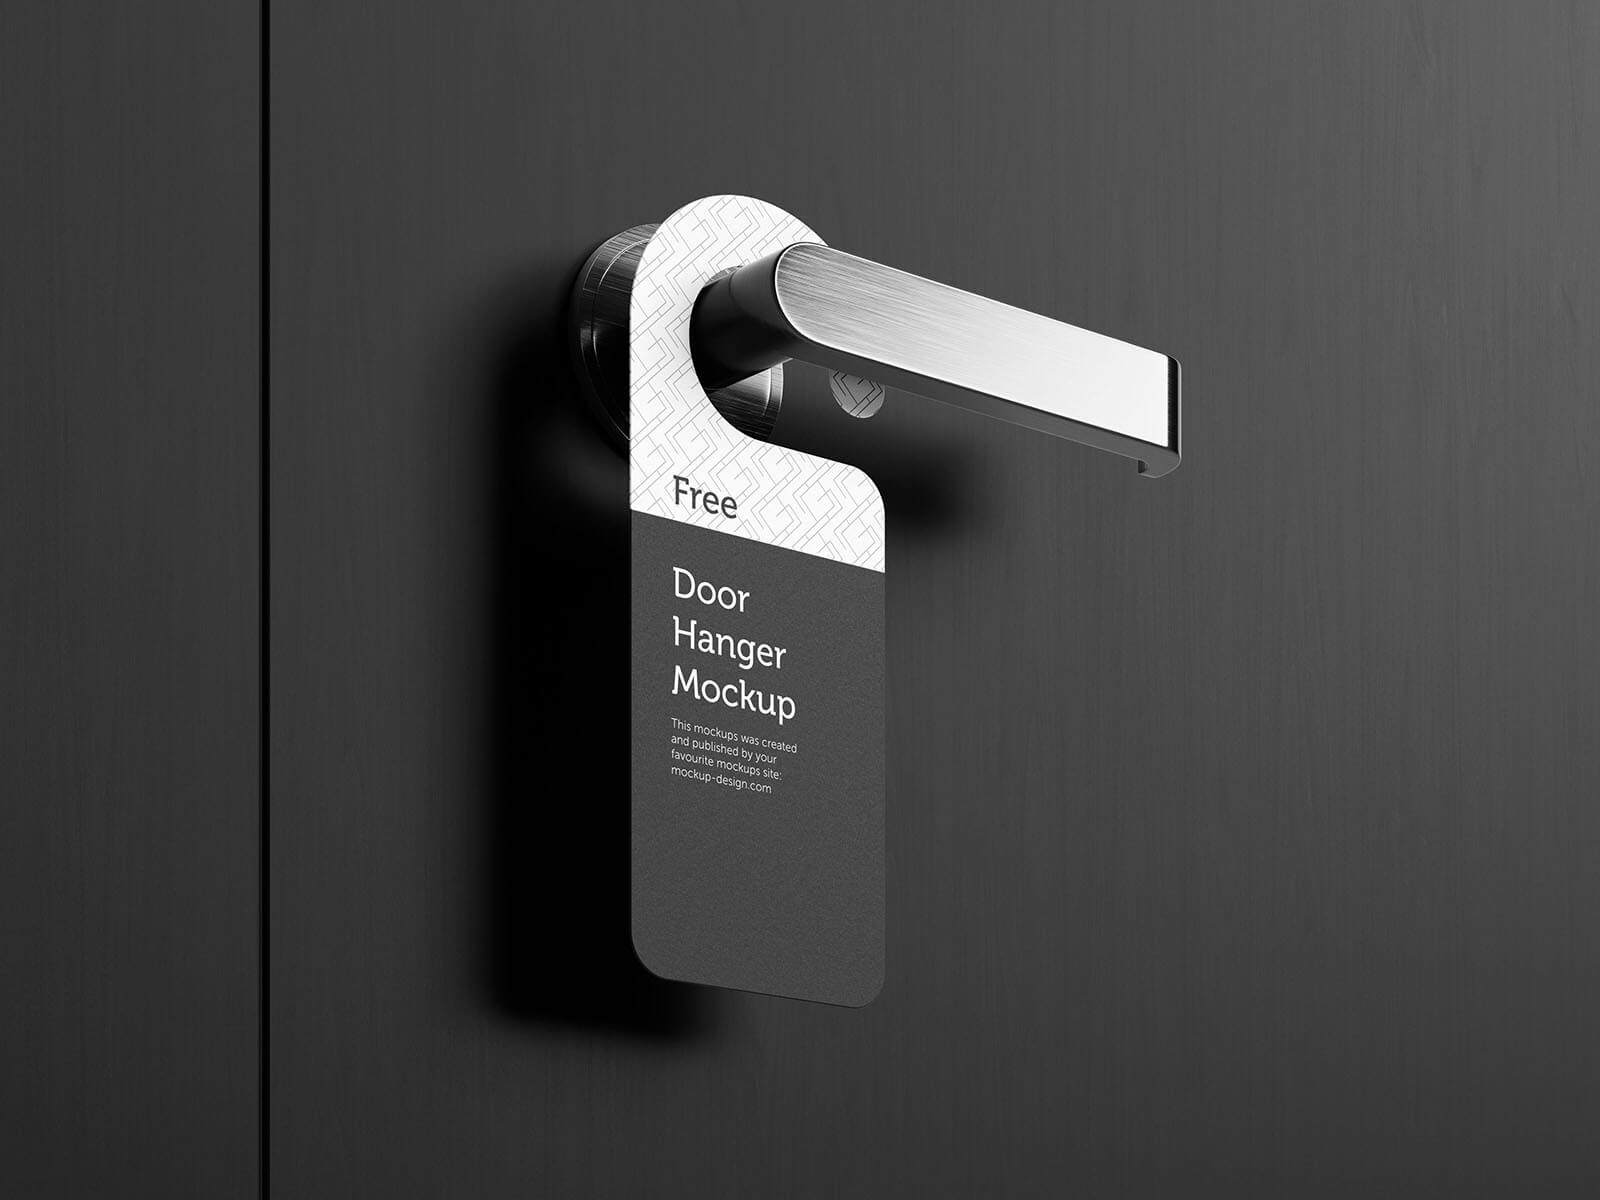 Mockup of a door hanger that hangs on the door handle. I prepared the mockup presentation in dark, contrasting colors, but there is nothing stopping you from using other colors. You can choose the color of the left and right parts of the background and quickly replace the design with your own. Mockup comes with three high-resolution PSD files that you can customize to suit your presentation and vision.